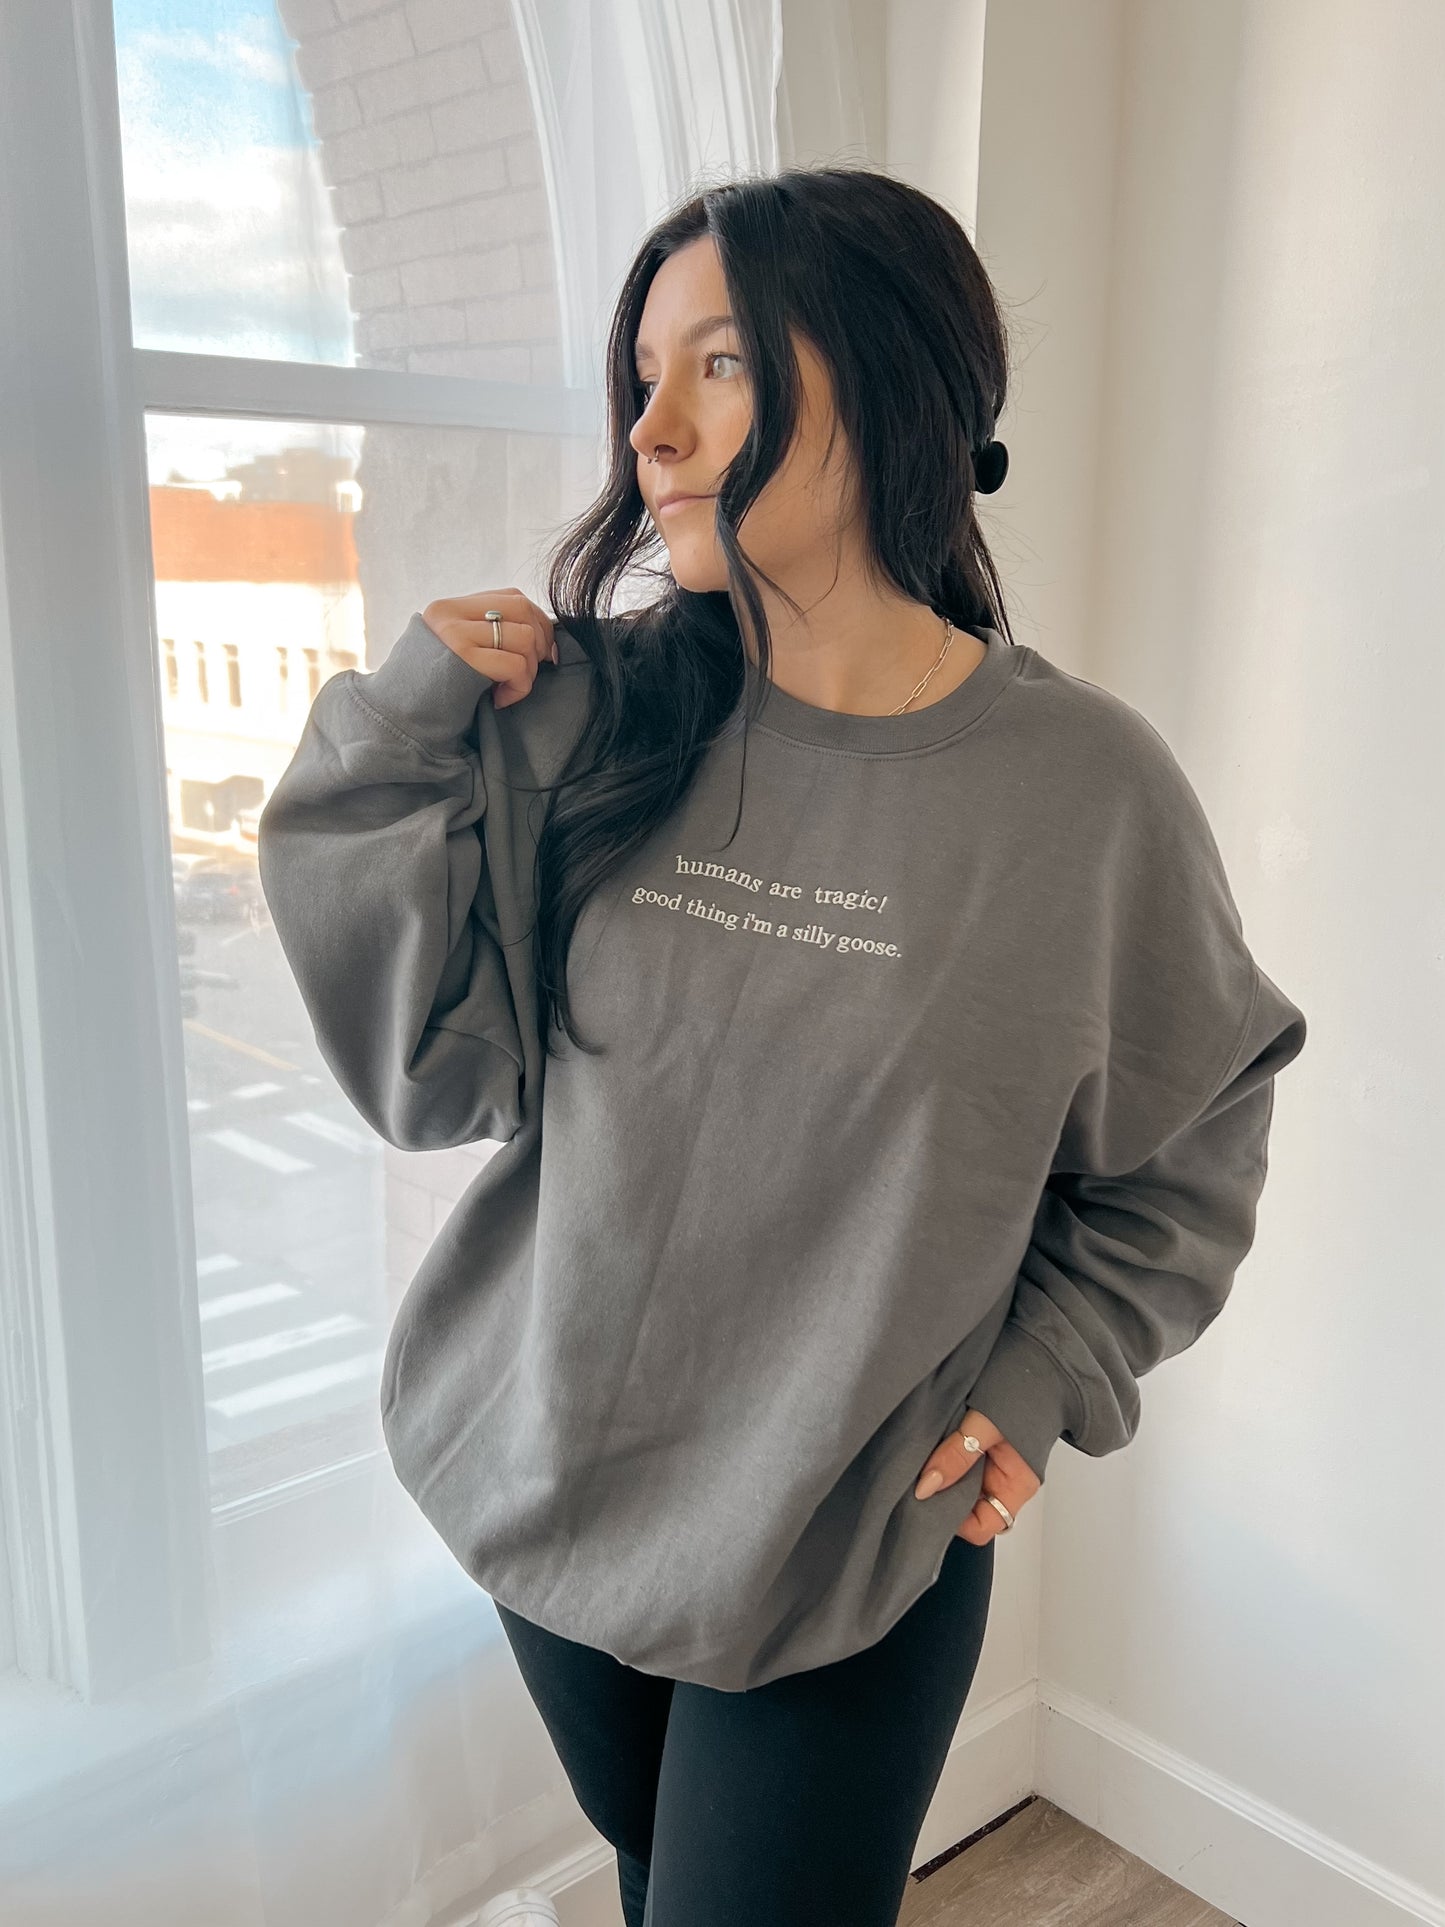 Humans are Tragic, Good Thing I'm a Silly Goose Embroidered Crewneck Sweatshirt